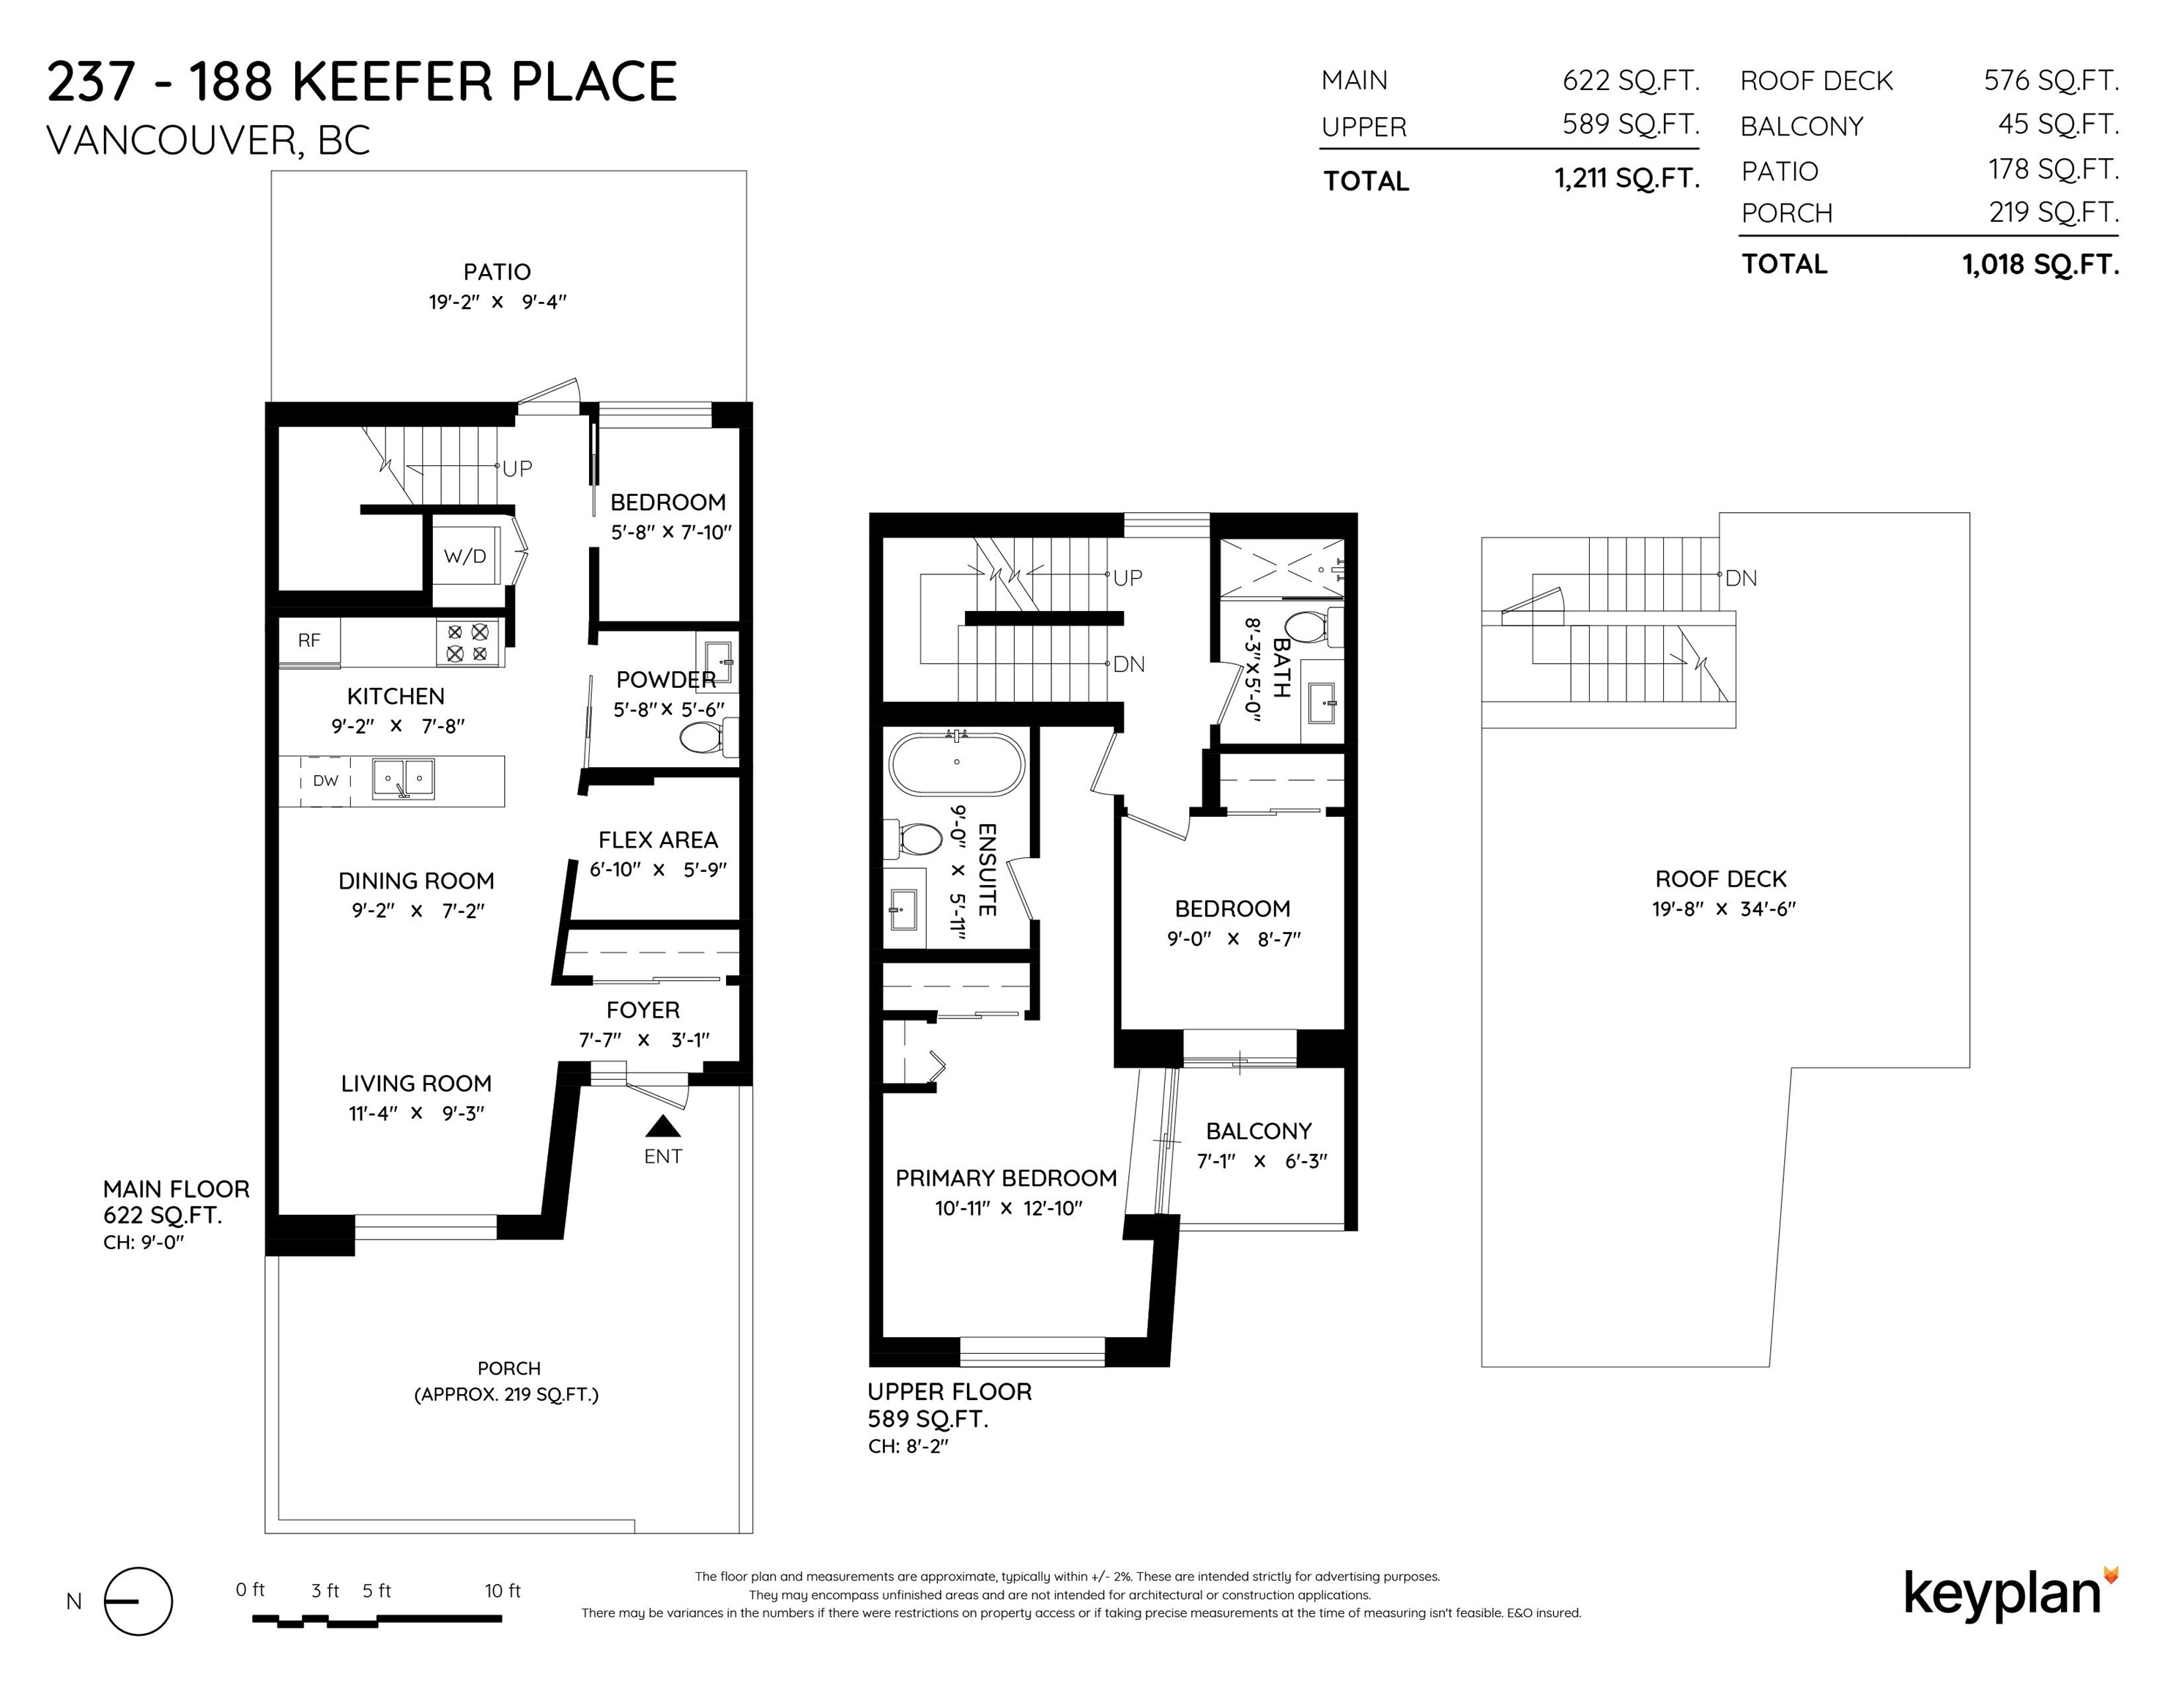 Listing image of 237 188 KEEFER PLACE